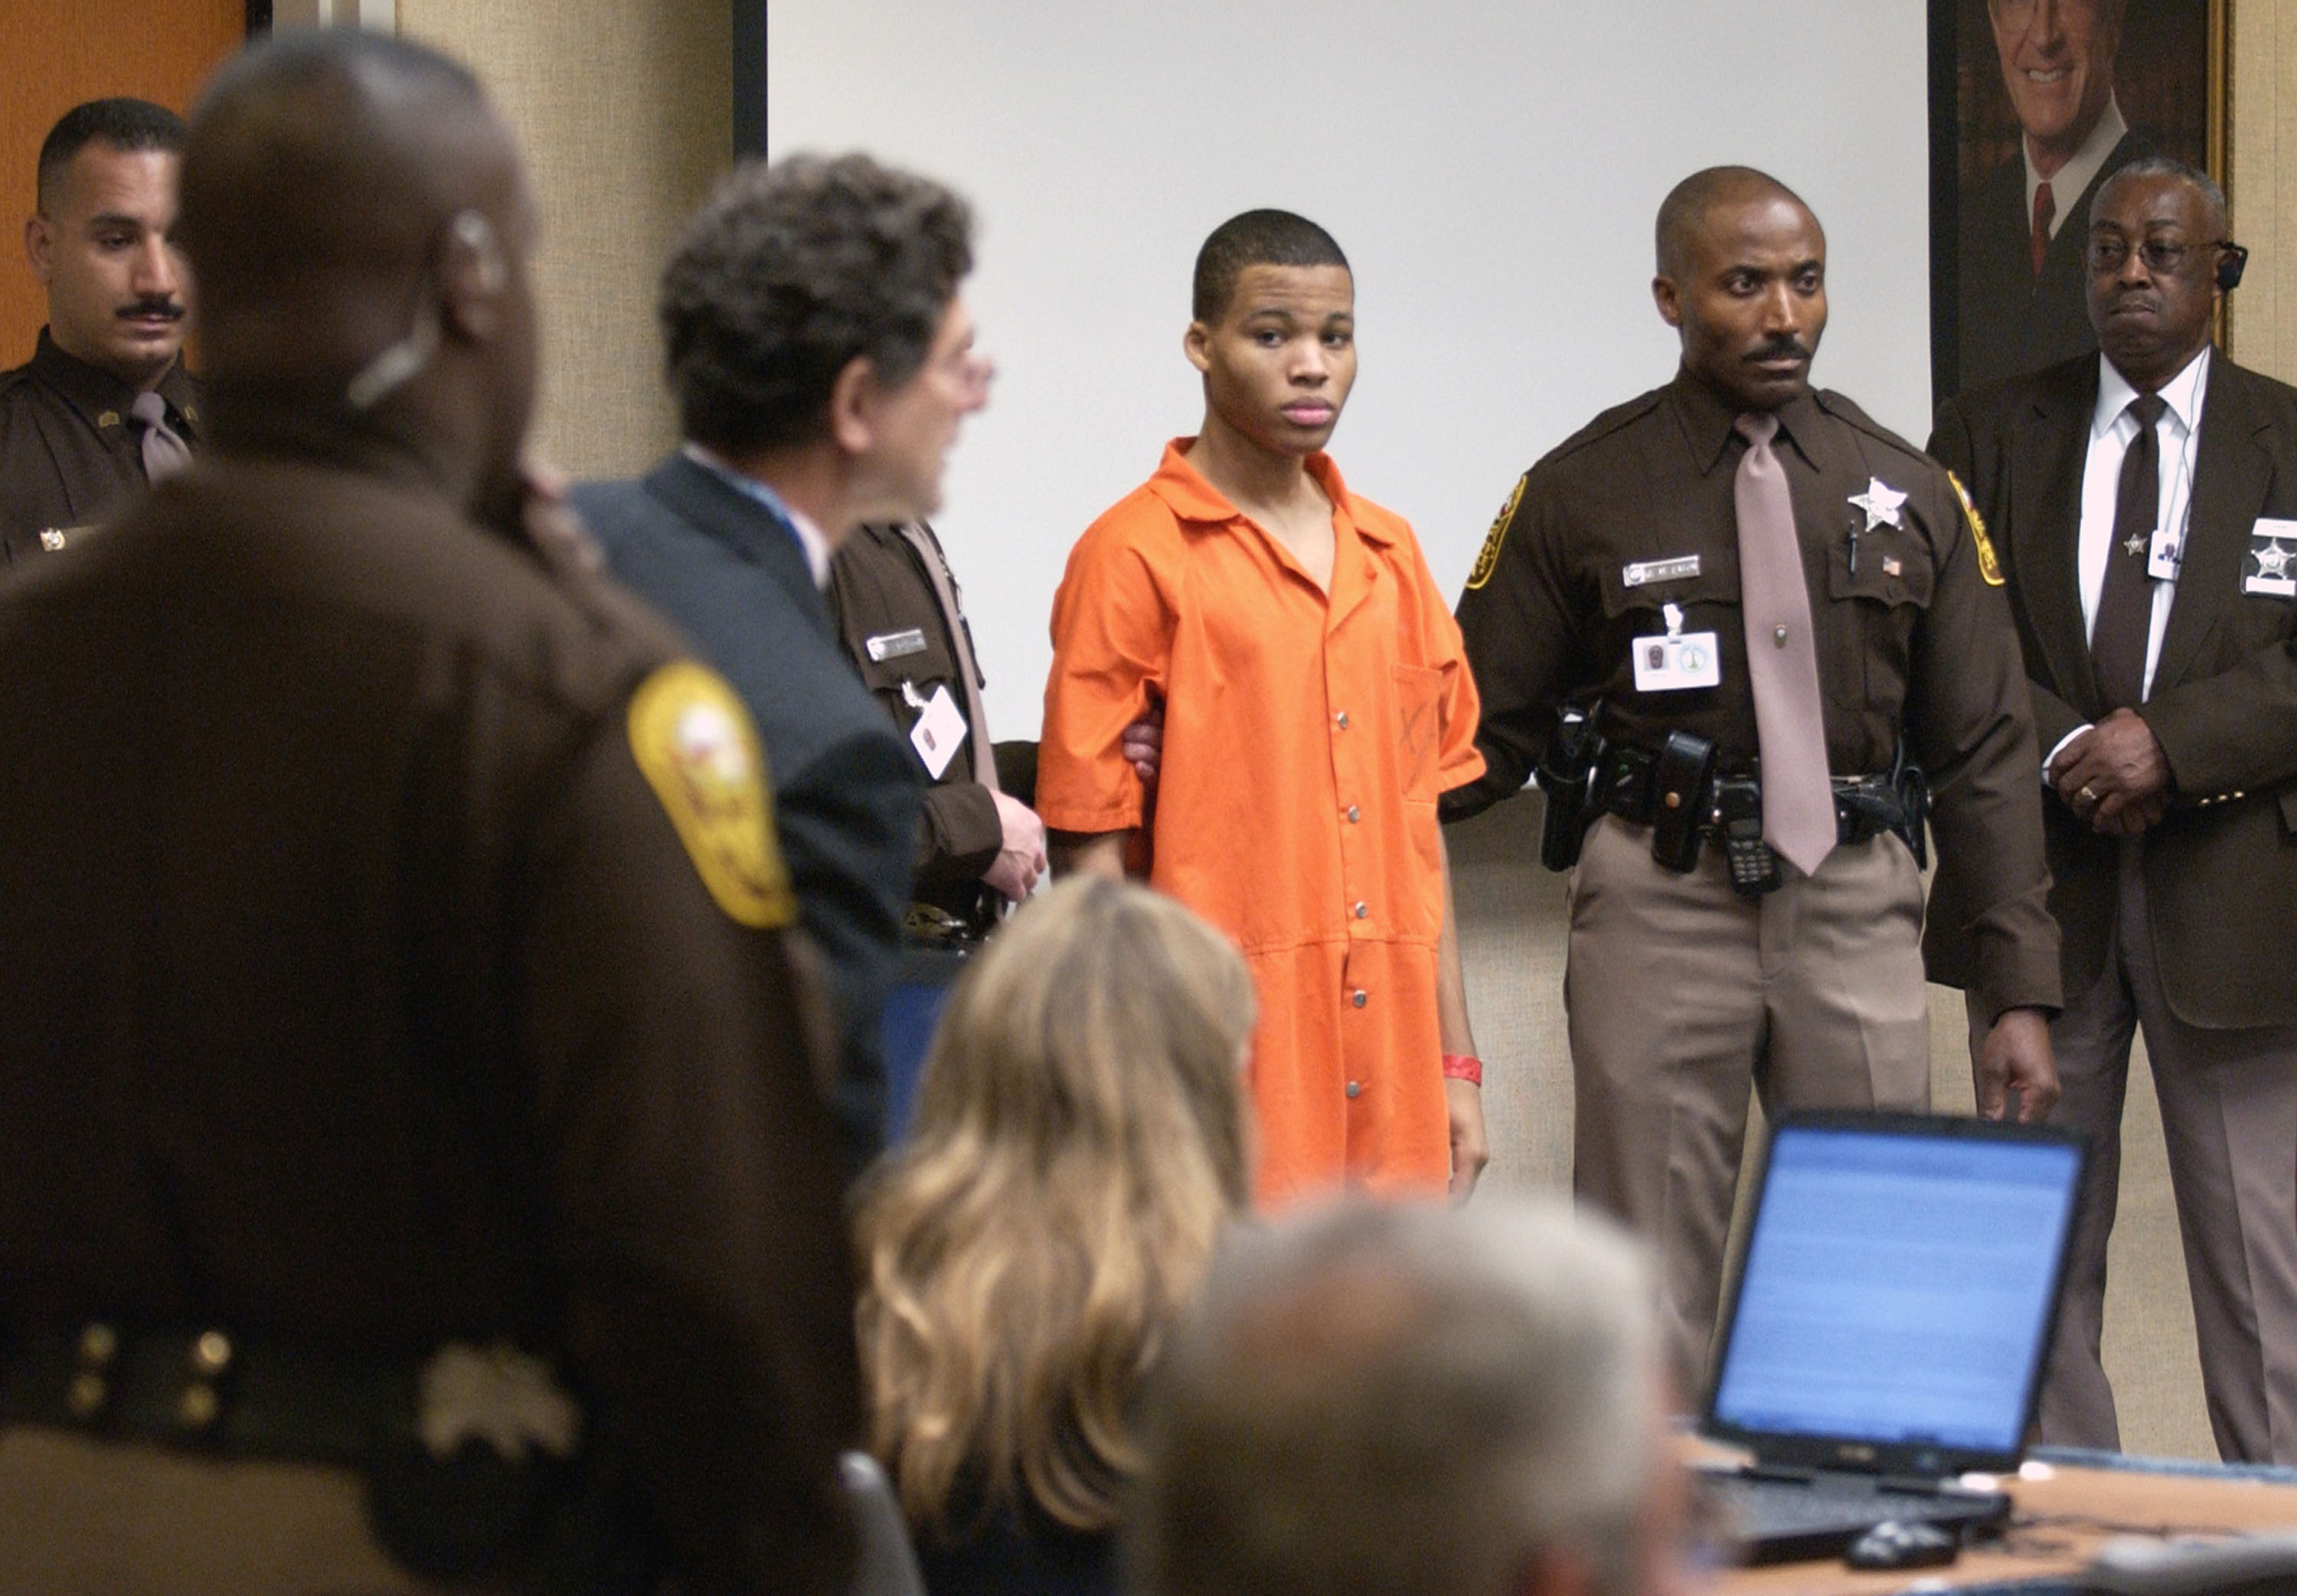 Sniper suspect Lee Boyd Malvo (C) is escorted by deputies as he is brought into court to be identified by a witness during the murder trial in courtroom 10 at the Virginia Beach Circuit Court October 22, 2003 in Virginia Beach, Virginia. Muhammad has decided not to represent himself in court and to turn his defense back to his attorneys. (Photograph by Davis Turner—Getty/Pool)